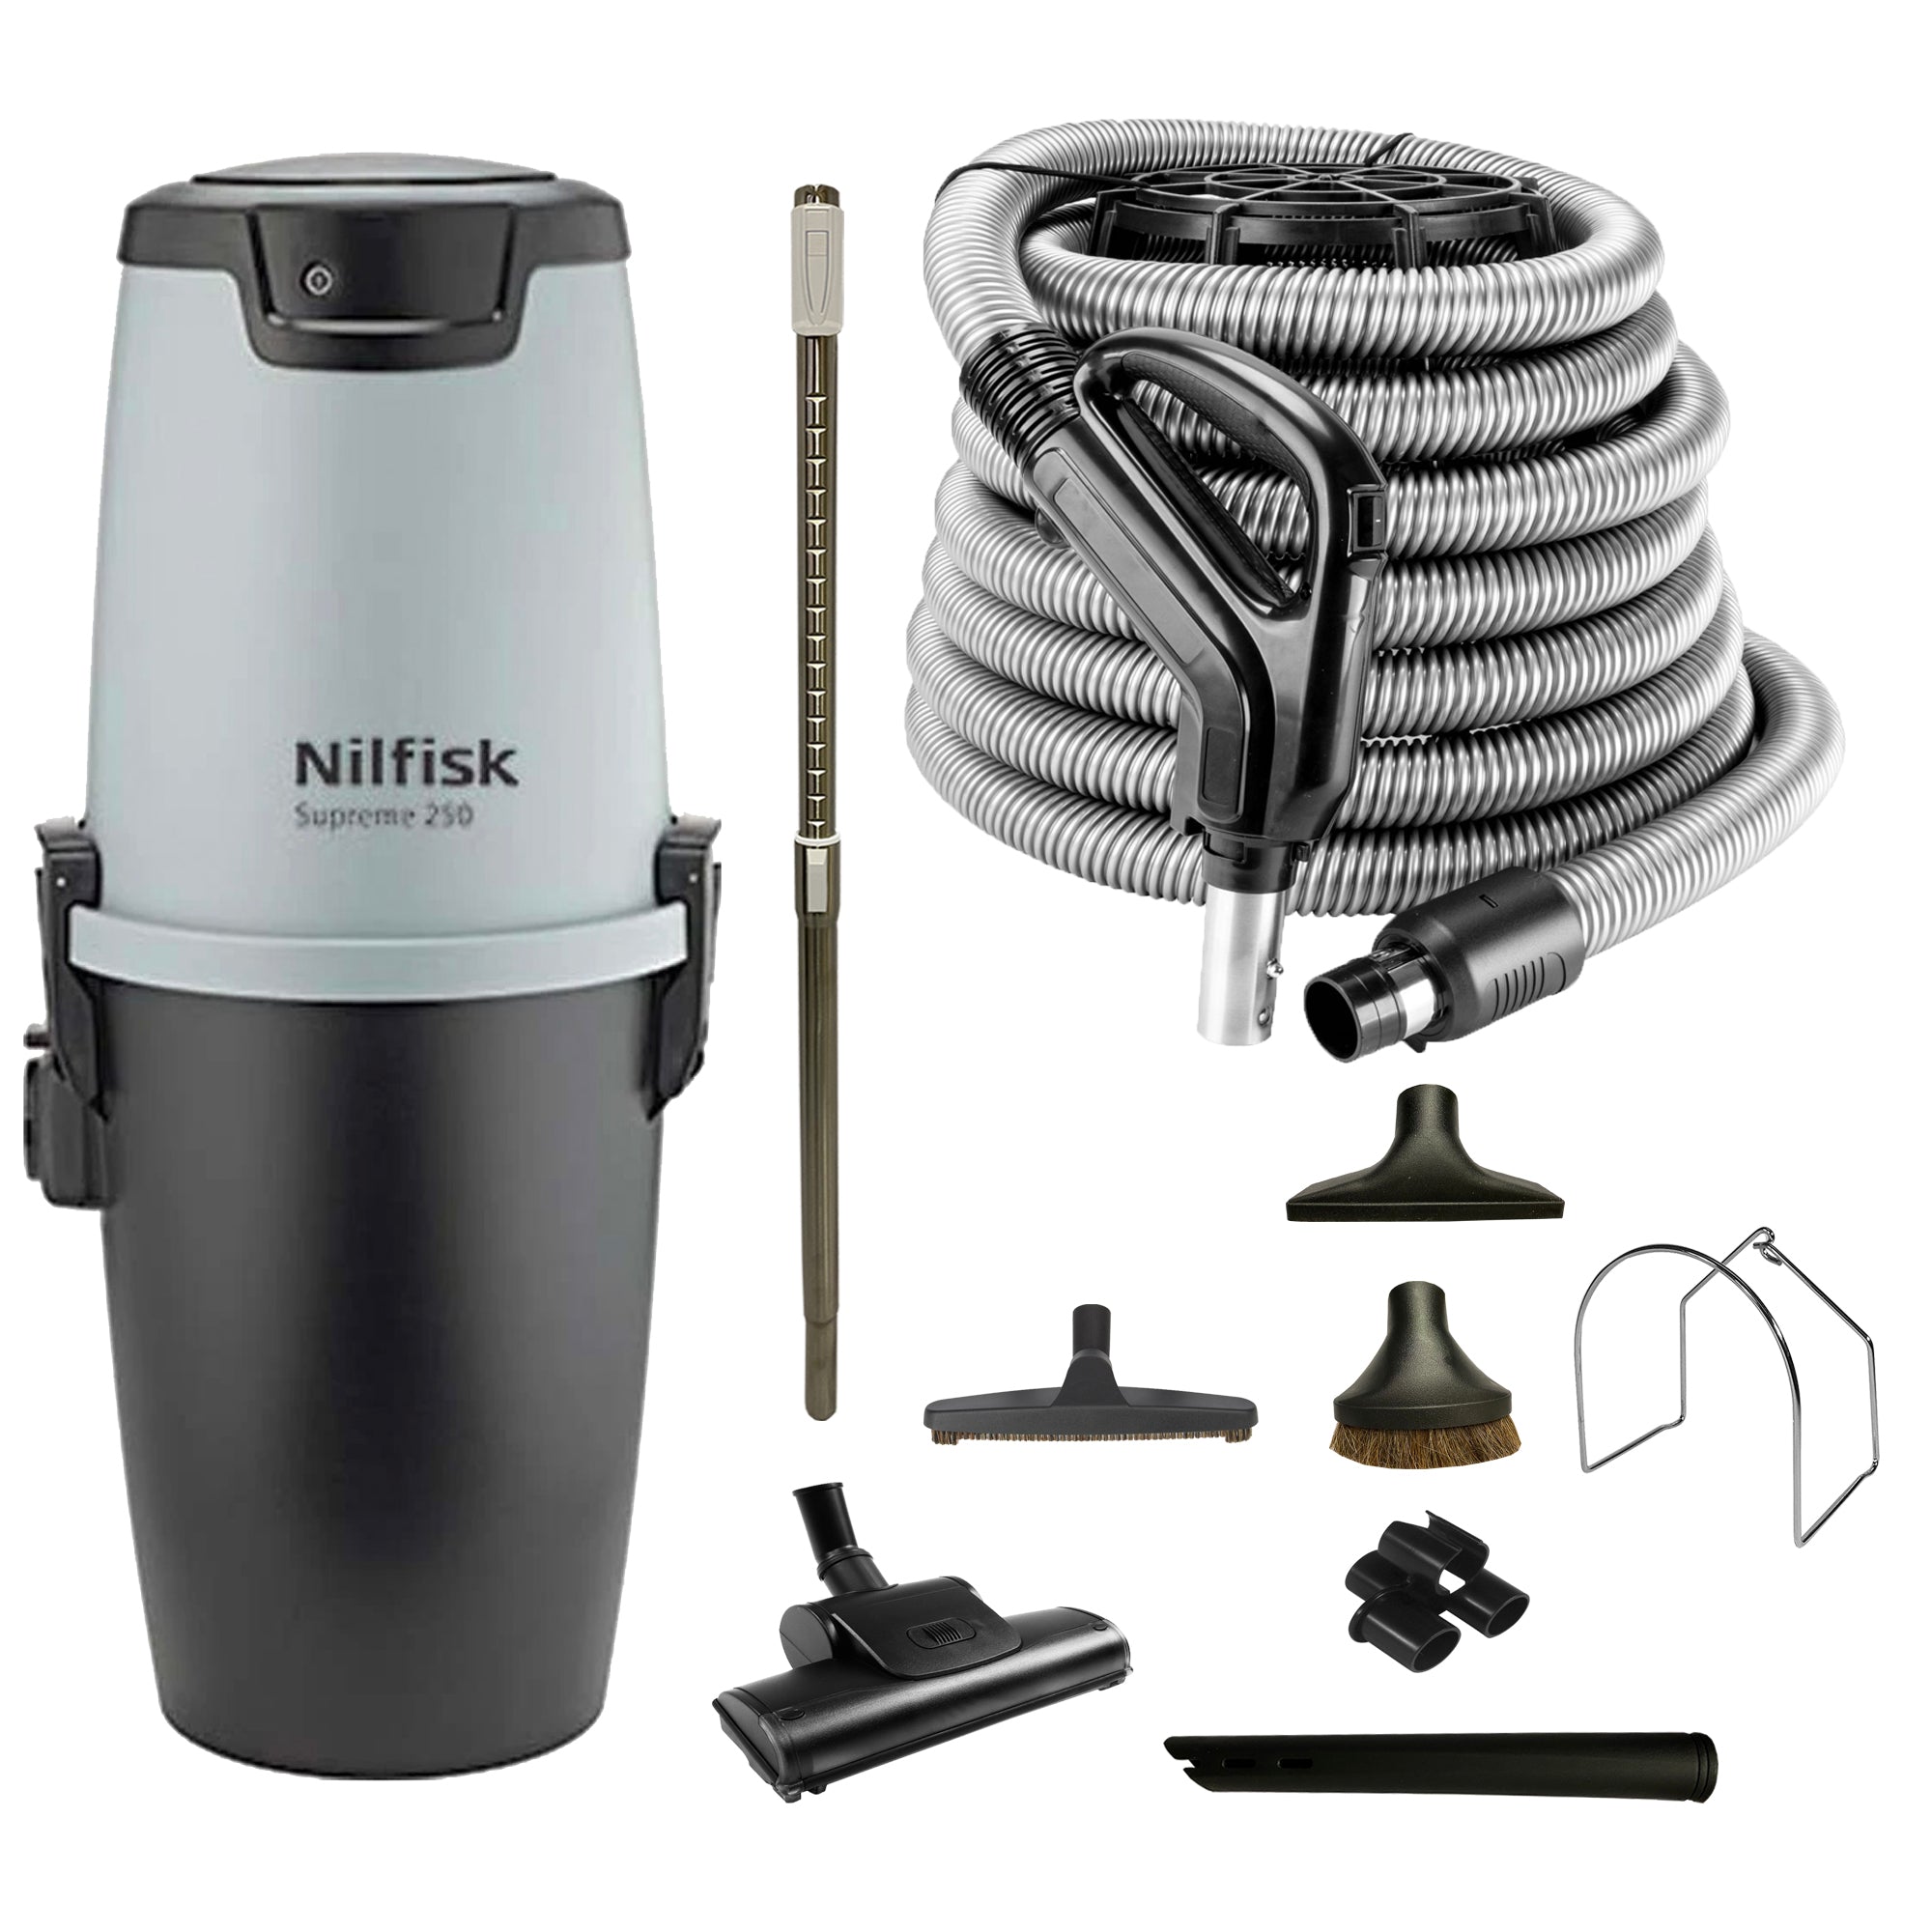 Nilfisk Supreme 250 Central Vacuum Cleaner with Standard Air Package - Black